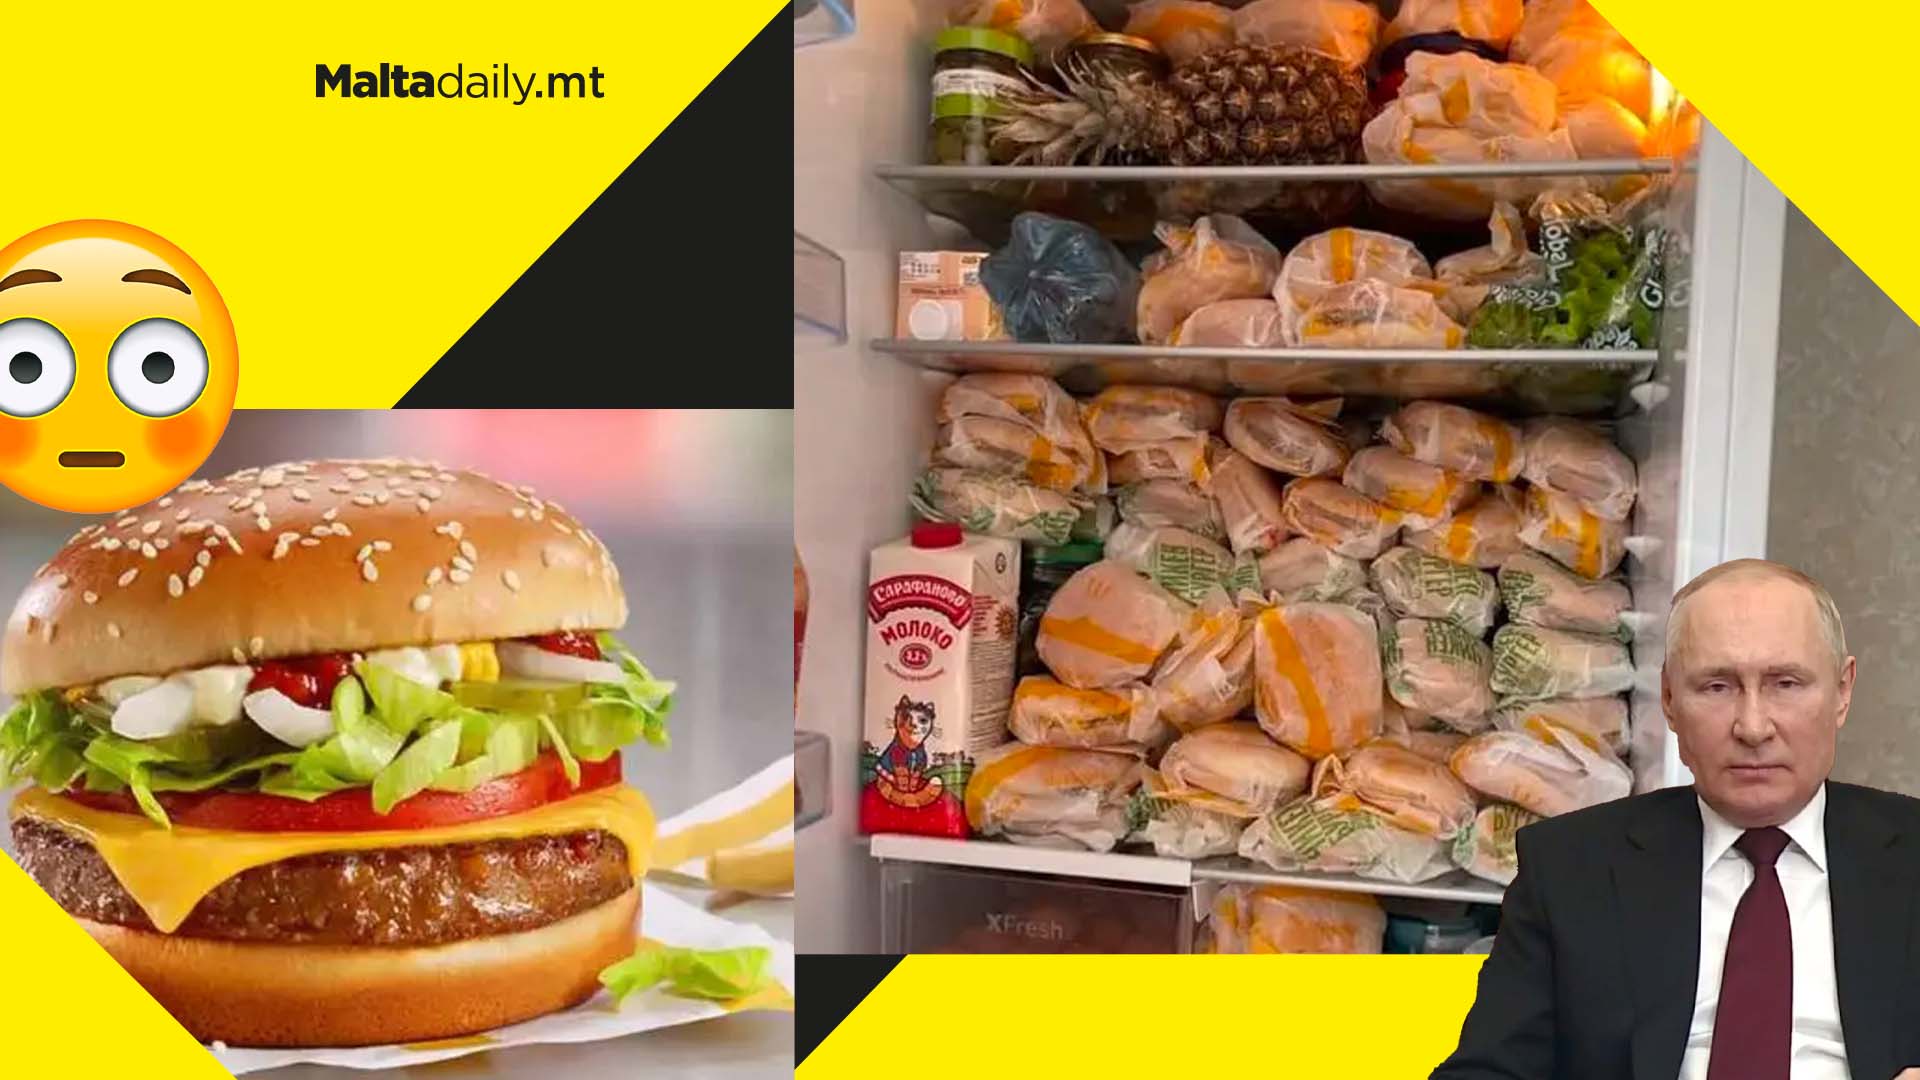 Man hoards McDonald’s burgers as company closes stores in Russia